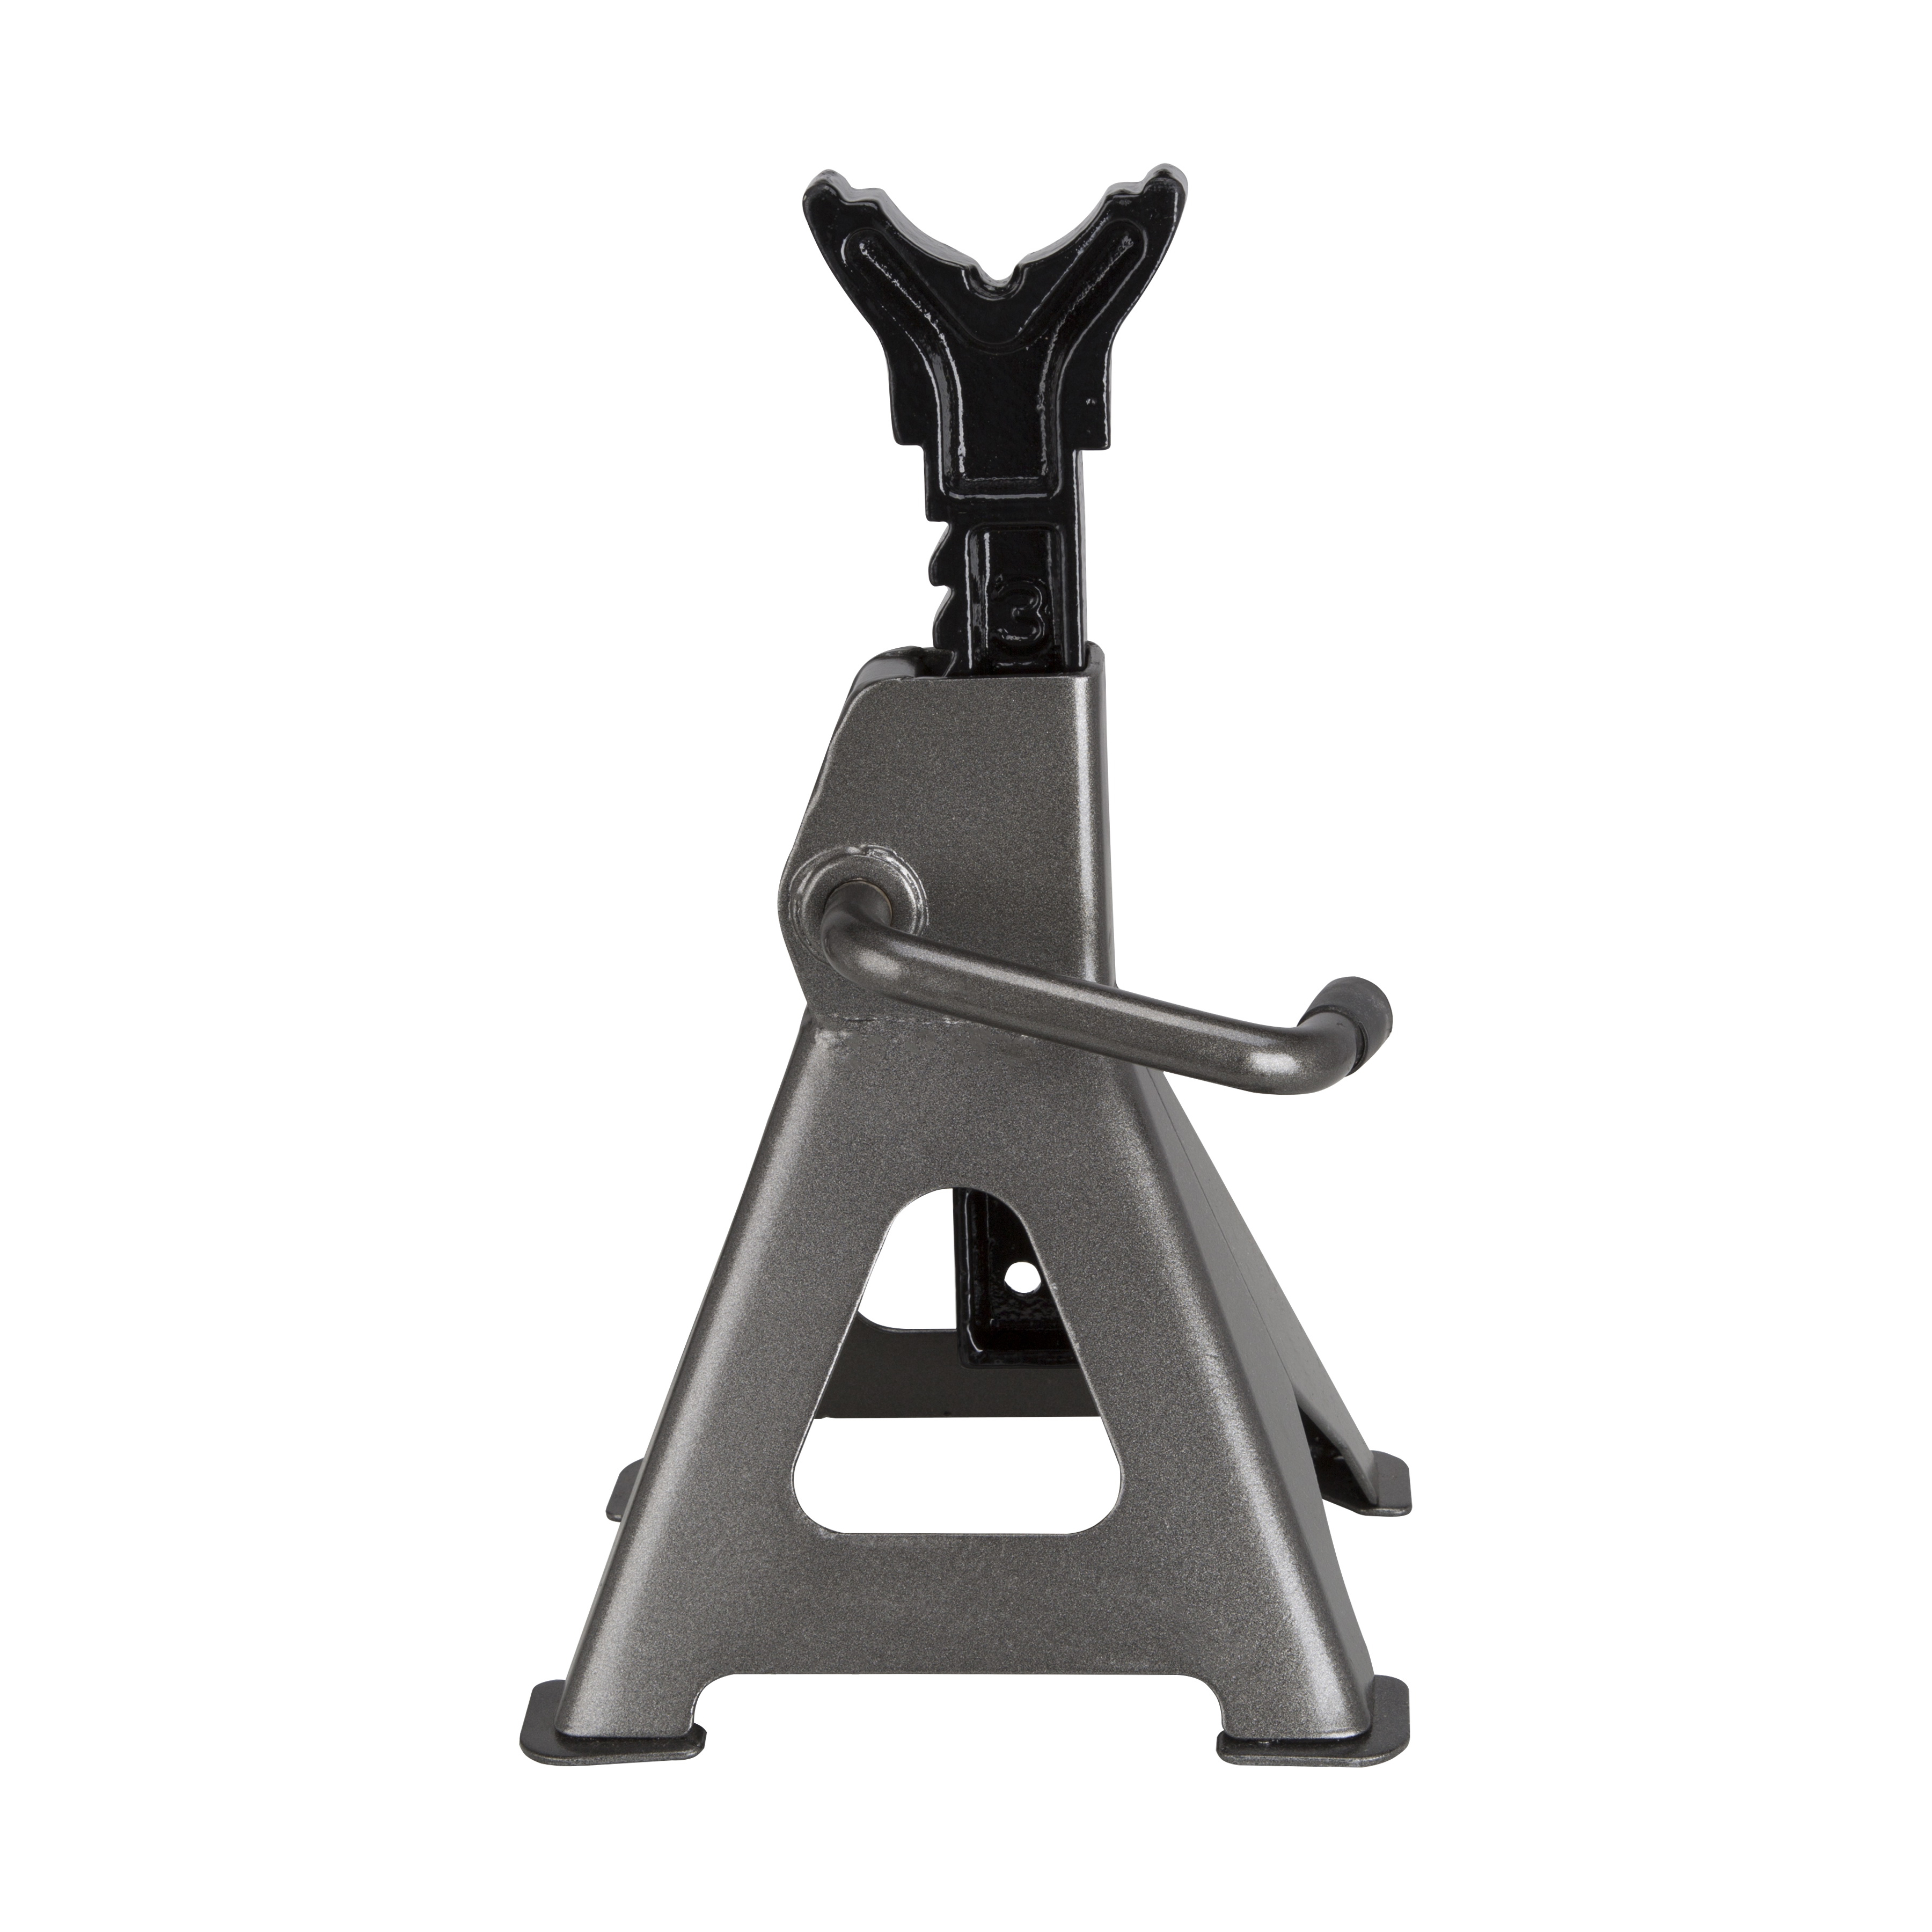 T210103 Jack Stand, 3 ton, 12 to 17-5/8 in Lift, Steel, Gray